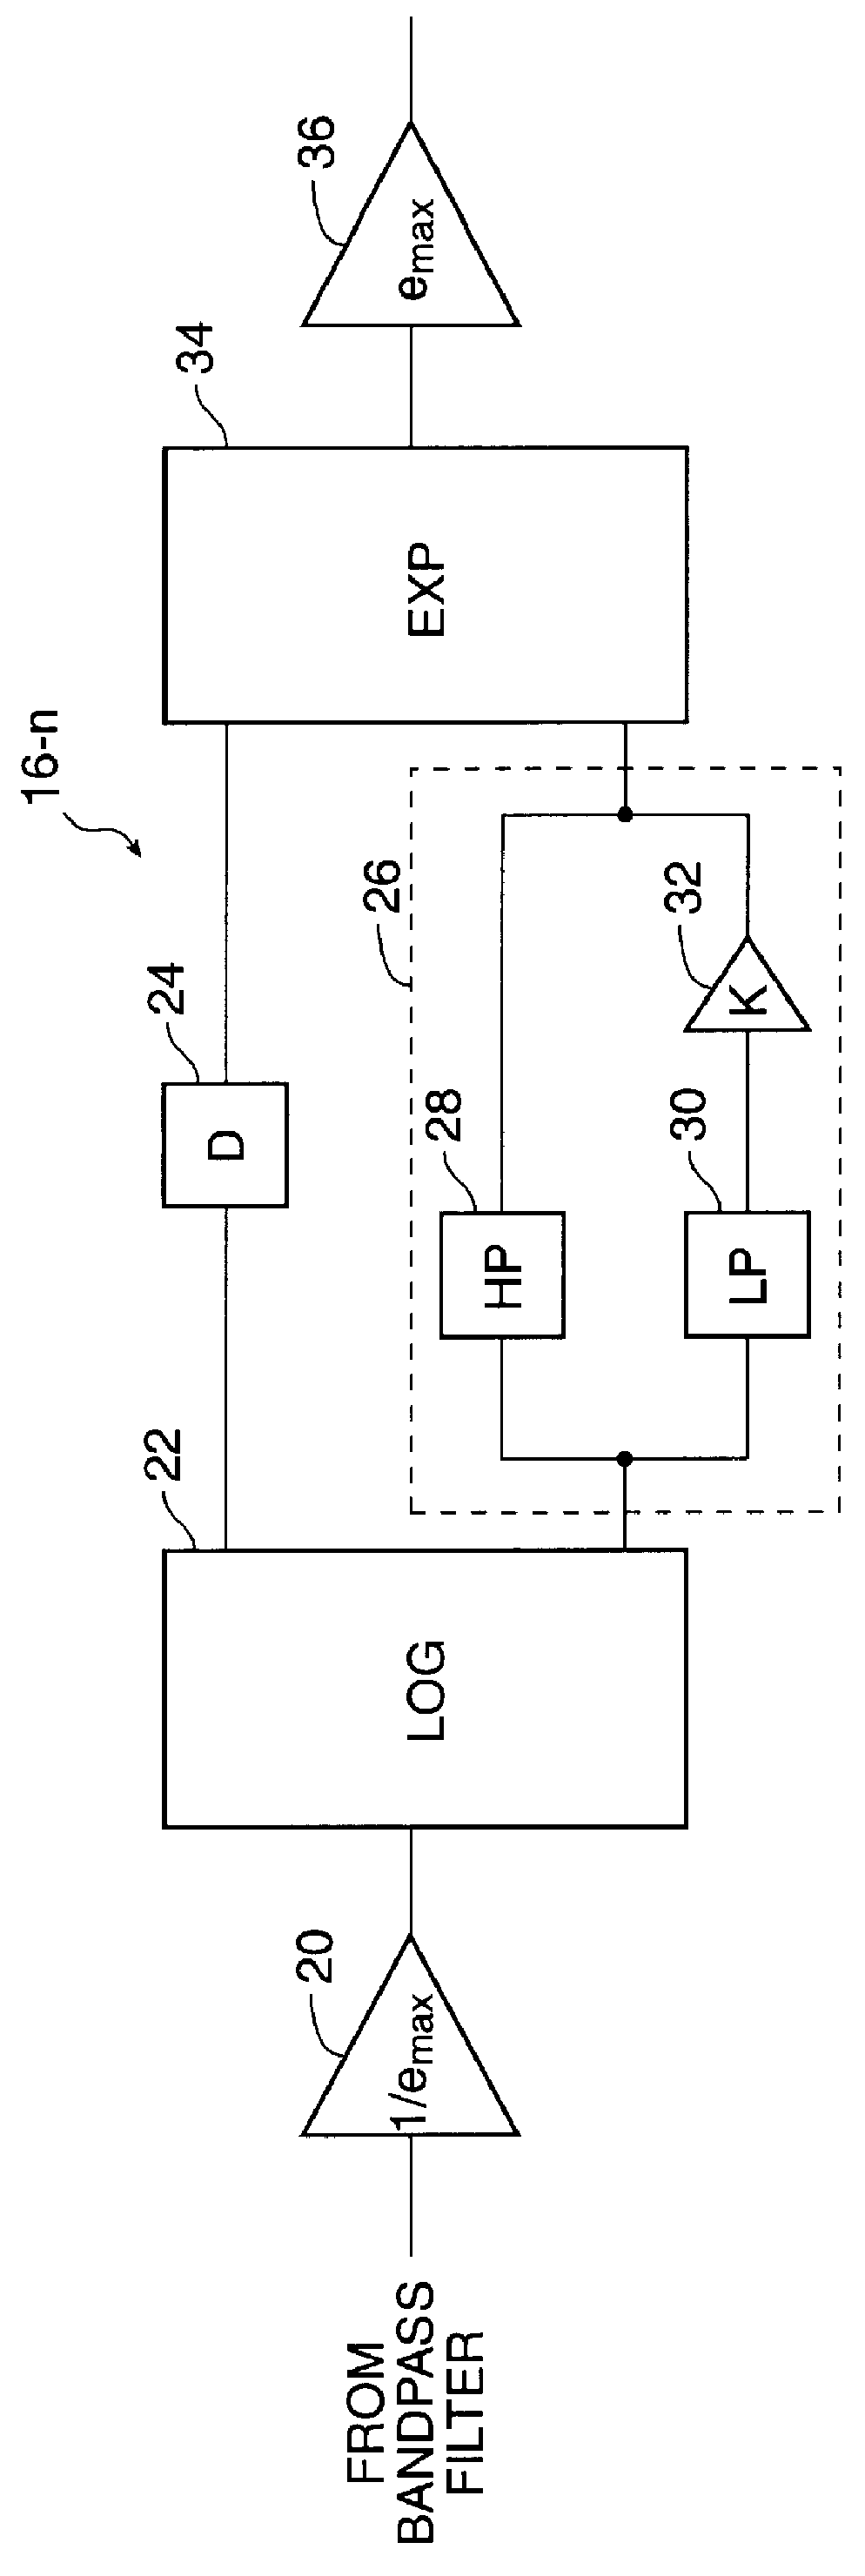 Hearing aid device incorporating signal processing techniques